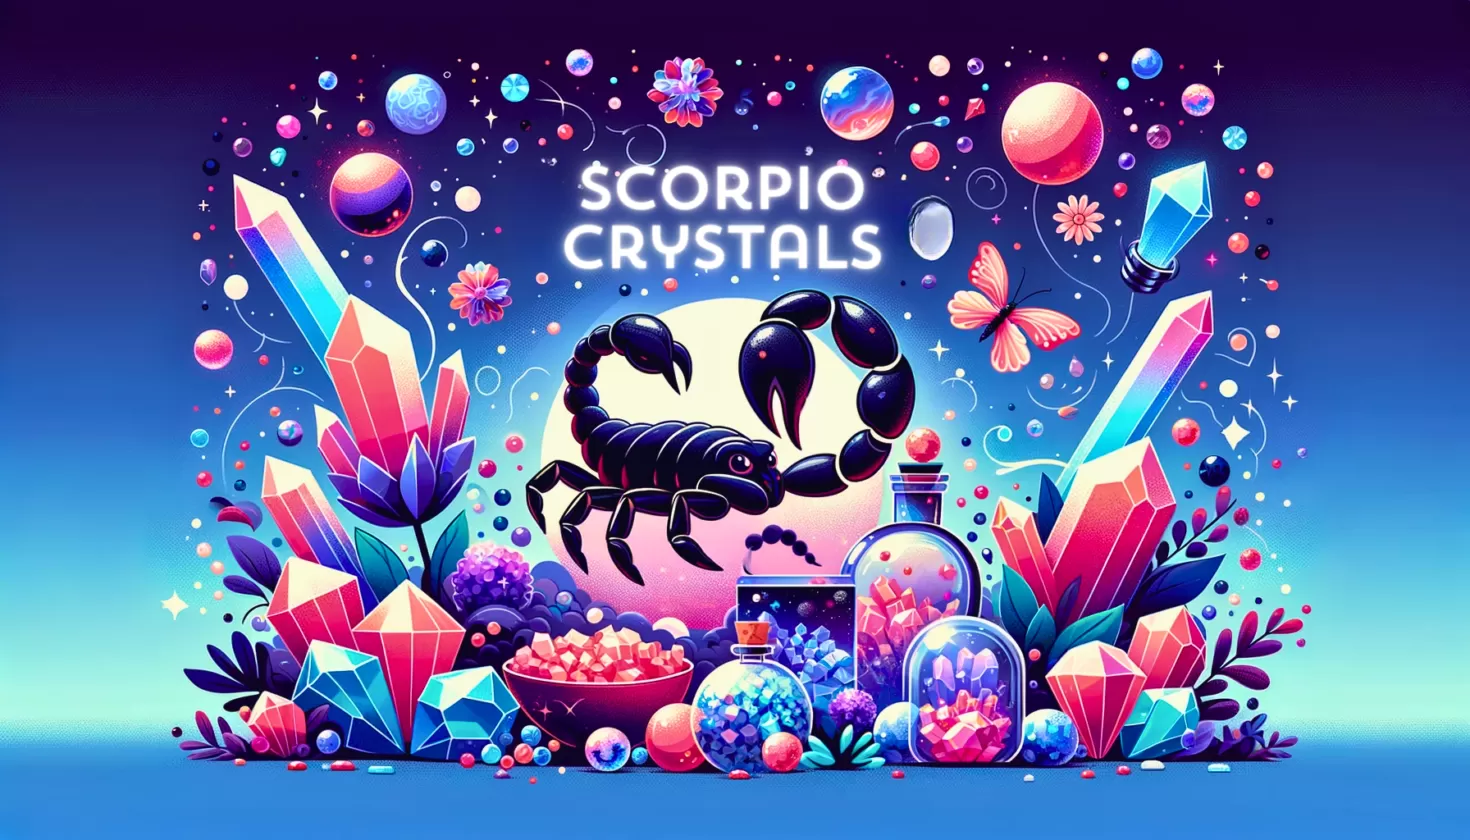 Scorpio Crystals: Scorpio Zodiac Sign with Resonating Crystals, Symbolizing Intensity and Healing Powers